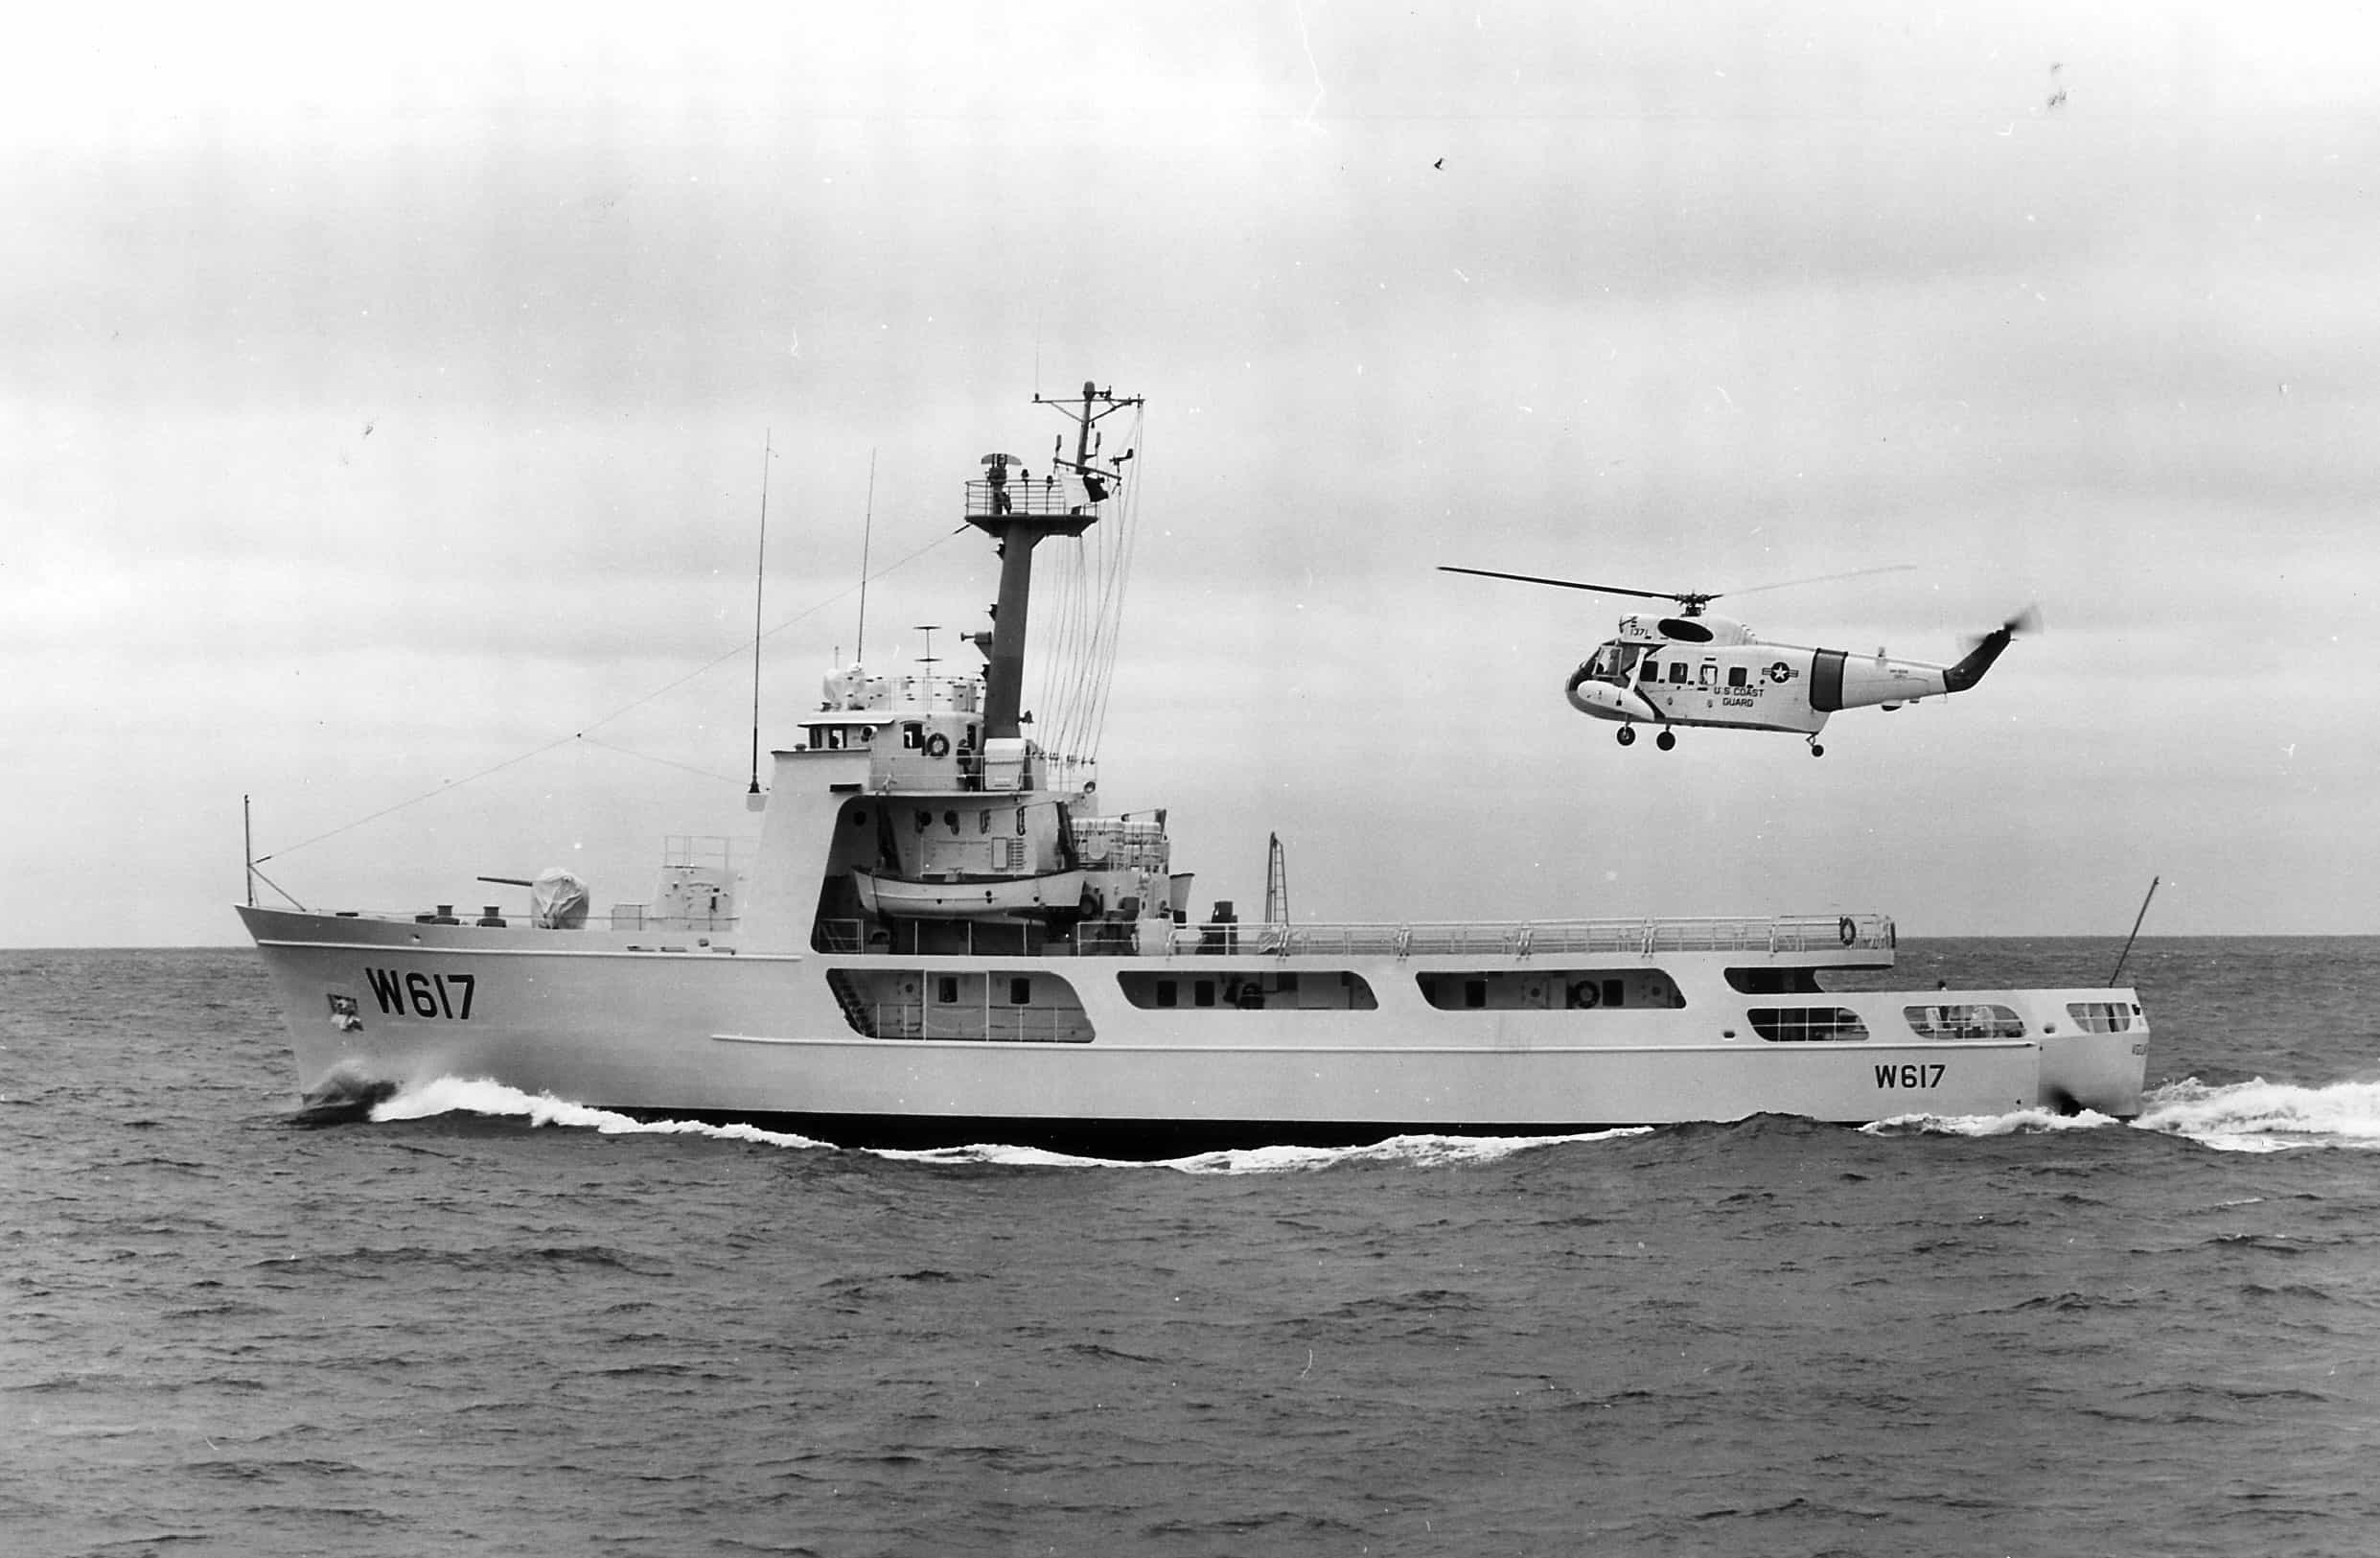 cgc vigilant - 1964 : First of the 210 foot Coast Guard Cutters Were Launched